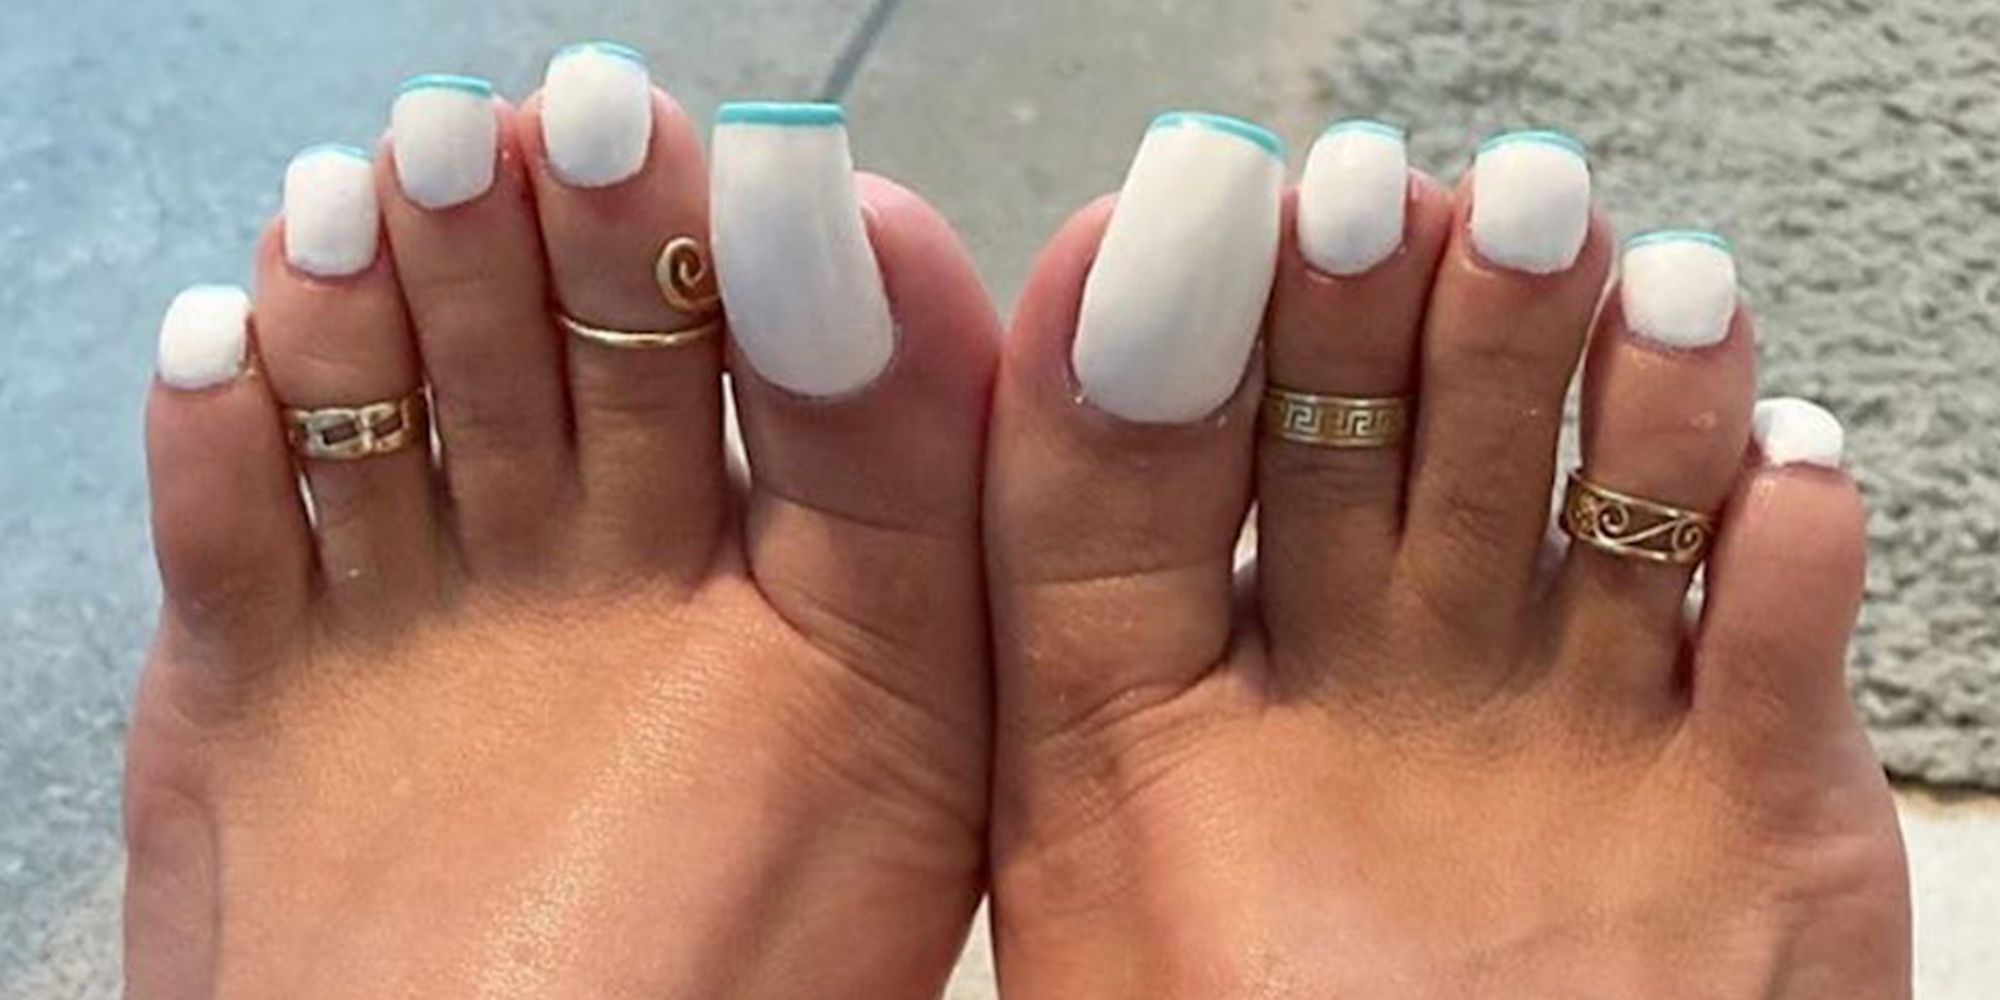 Long Fake Toenails Are in This Summer So Look Down at Your Own Risk